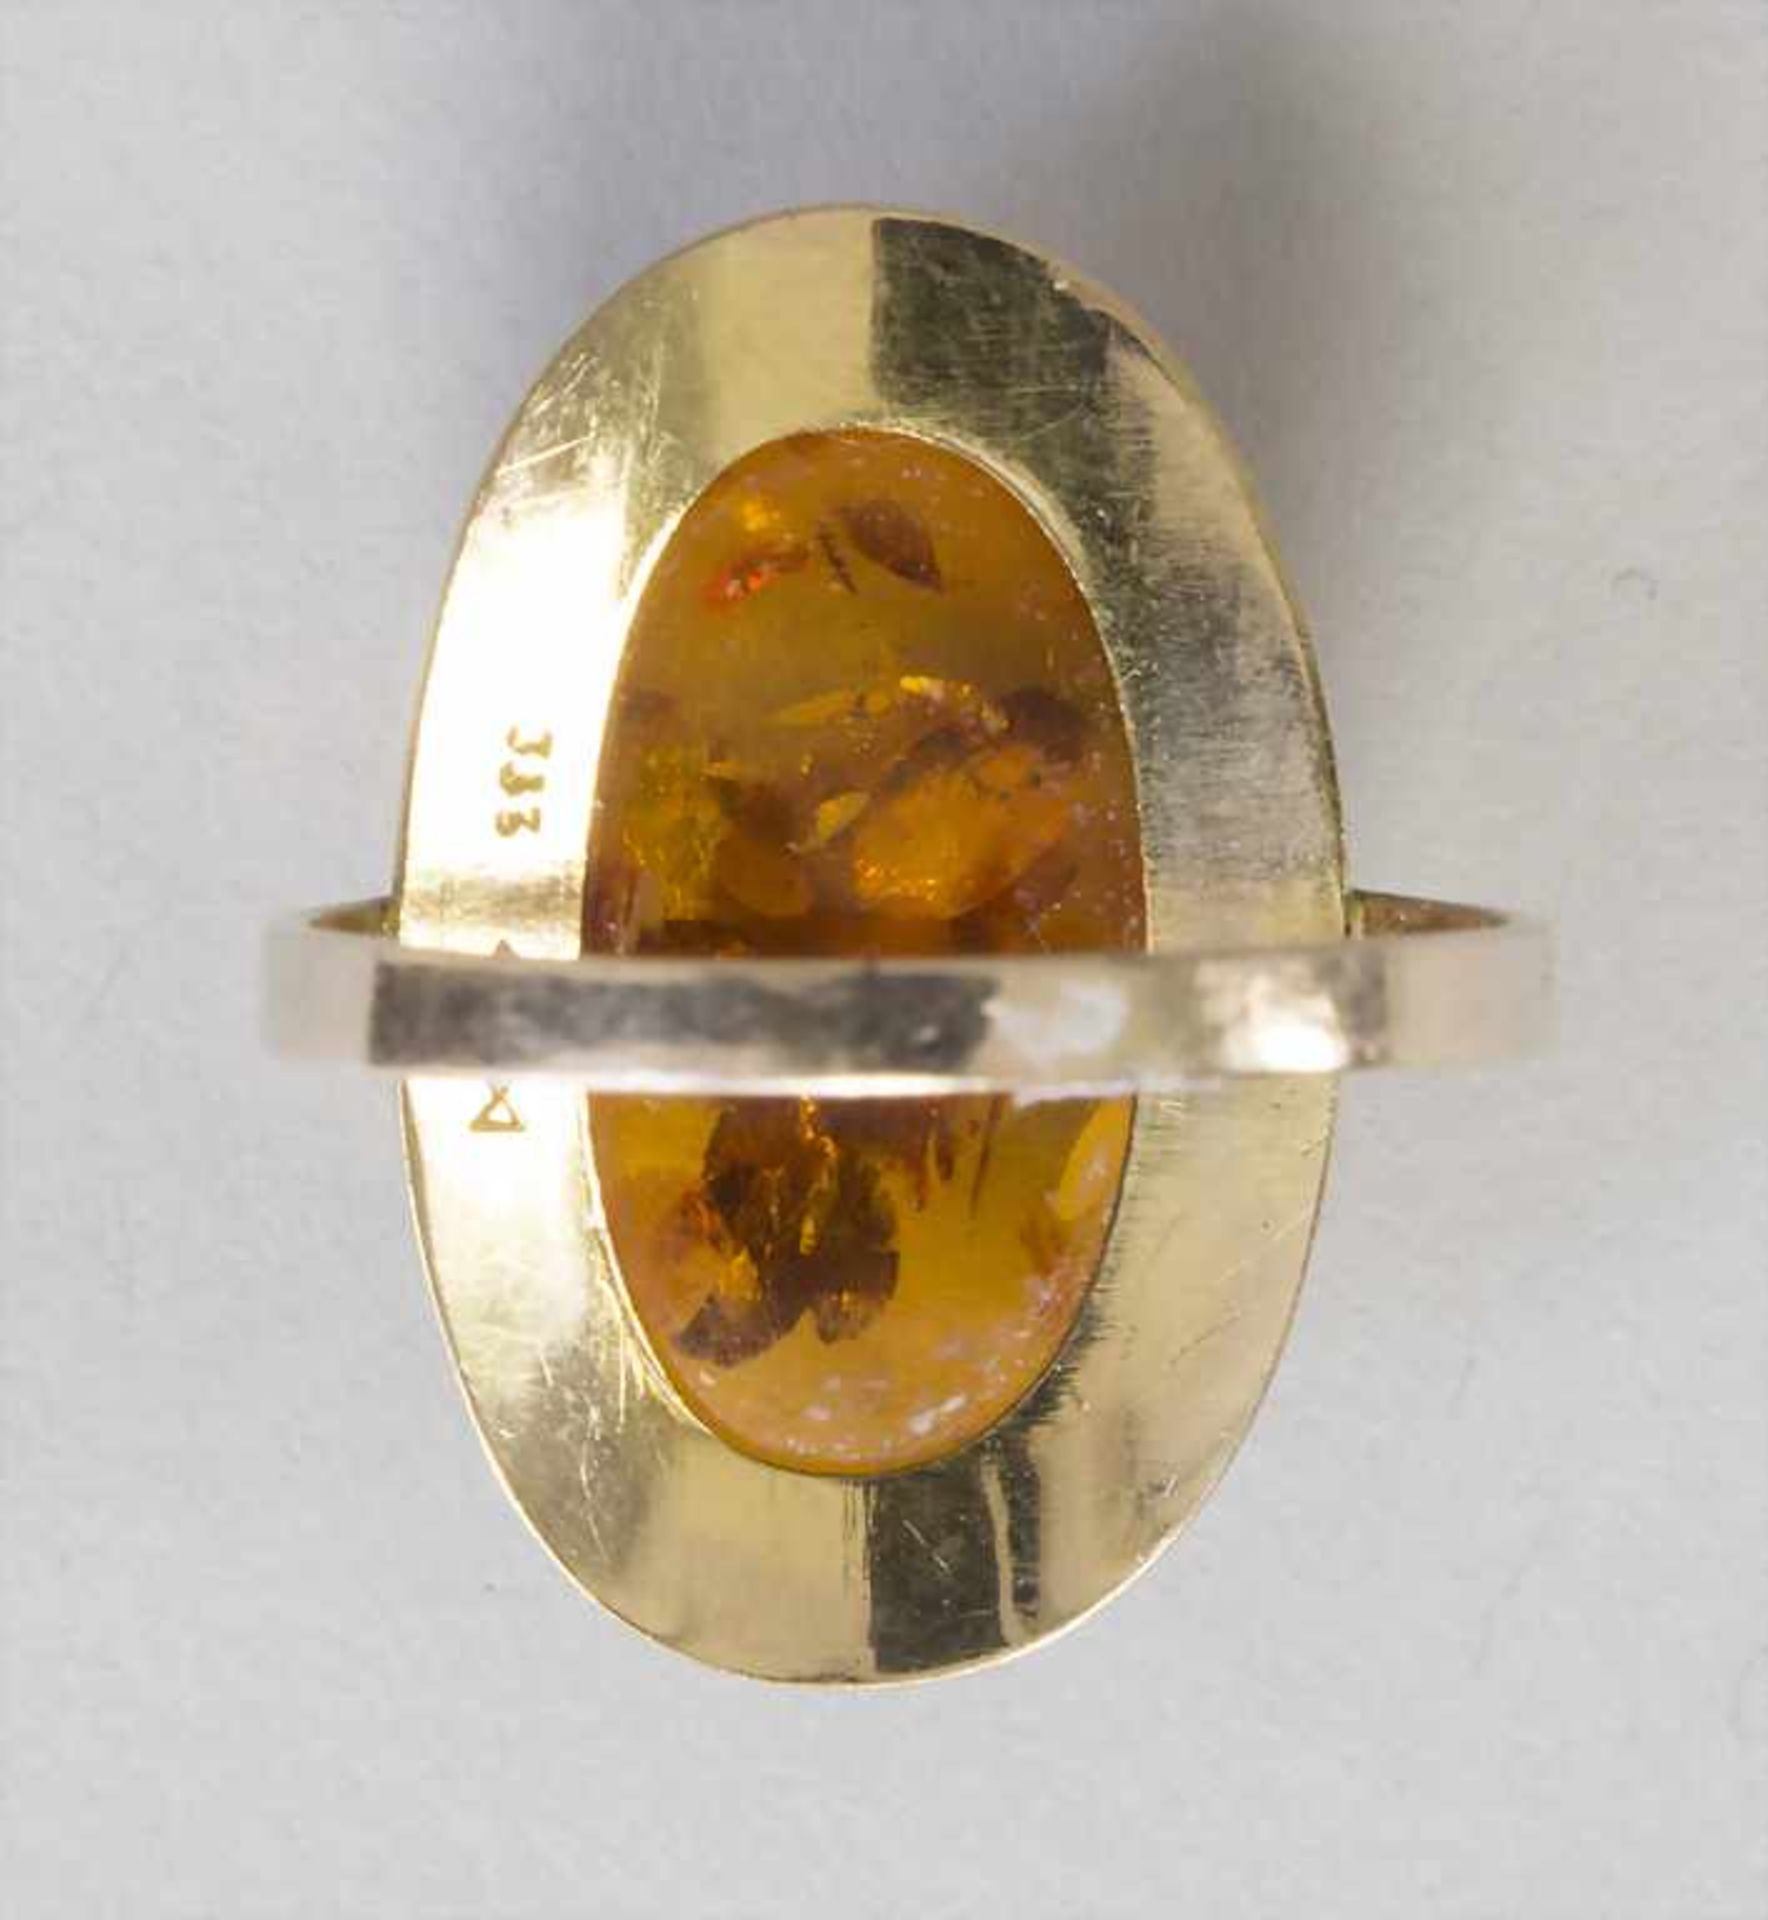 Fischland Damenring in Gold / A ladies ring in gold - Image 4 of 6